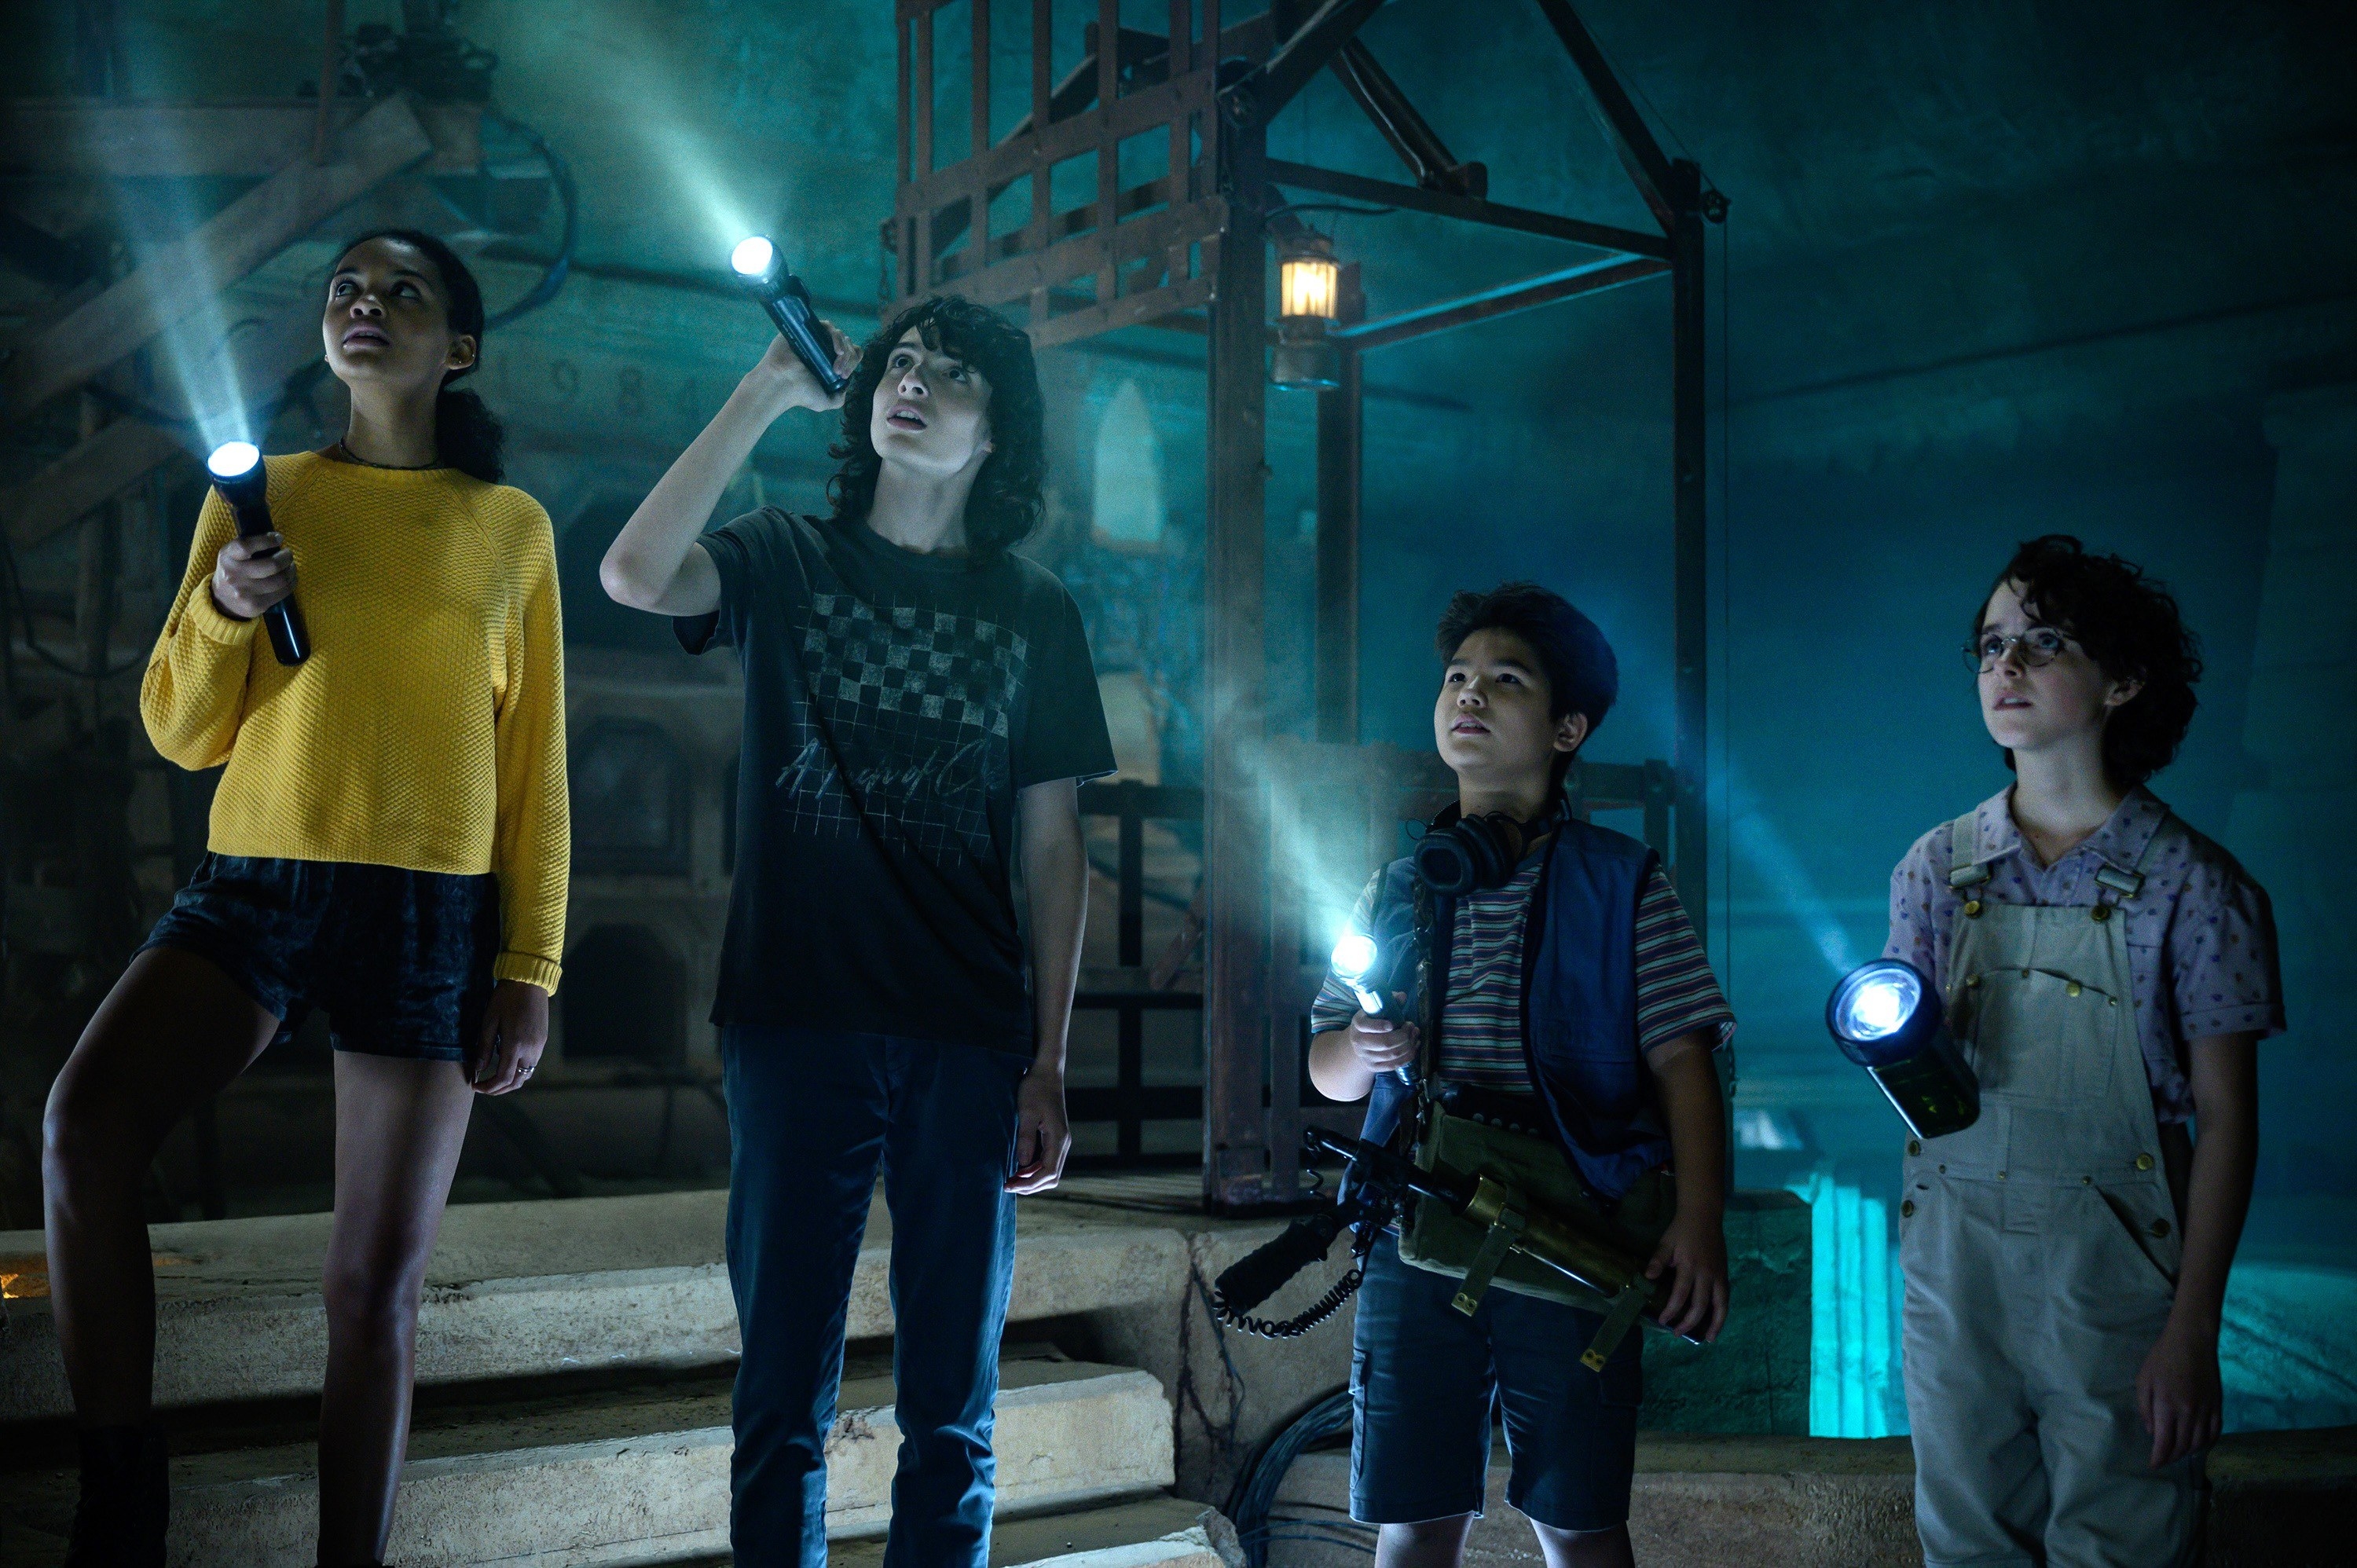 Four young people holding flashlights